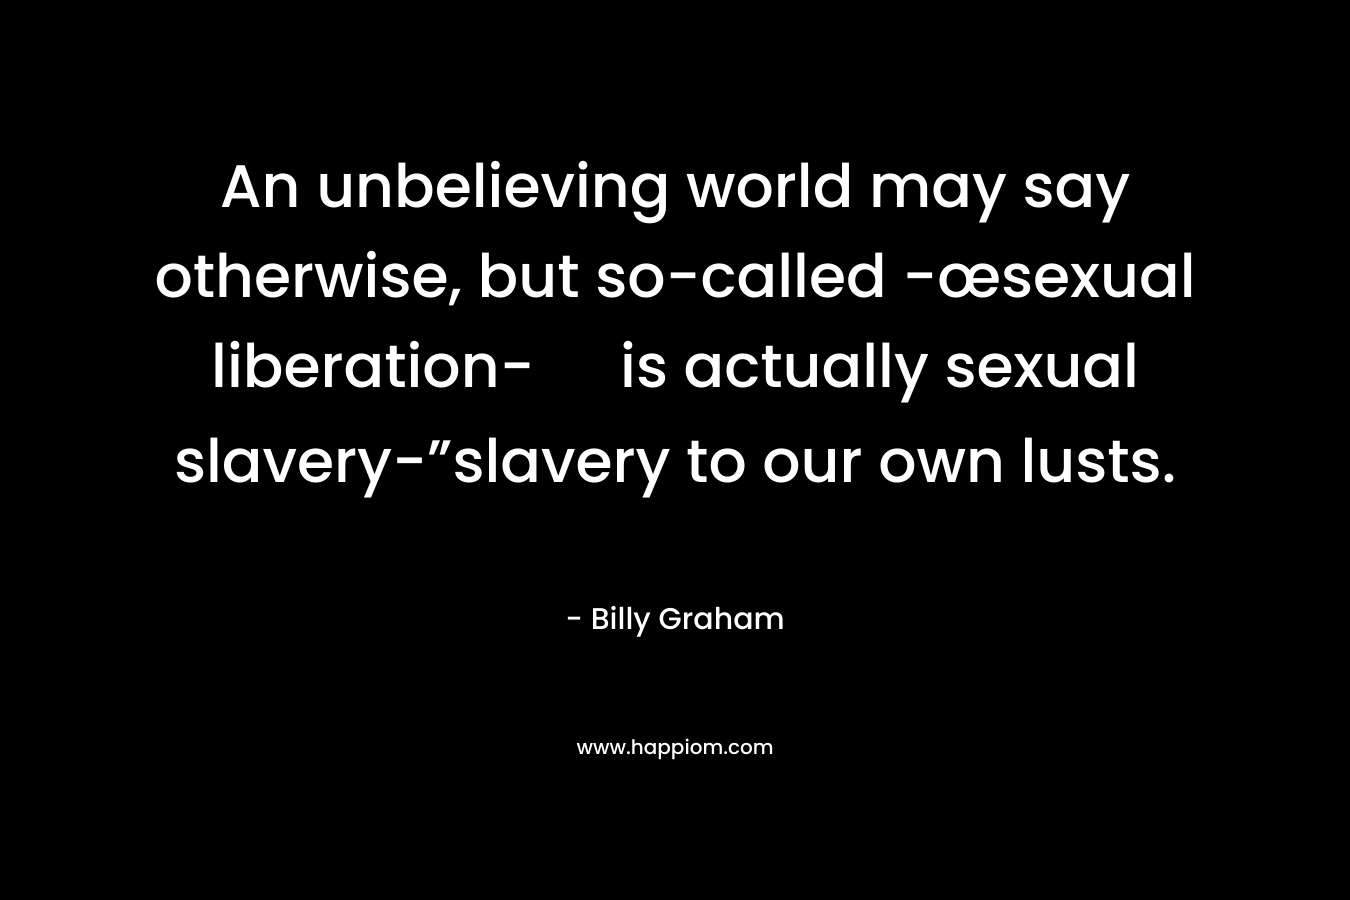 An unbelieving world may say otherwise, but so-called -œsexual liberation- is actually sexual slavery-”slavery to our own lusts. – Billy Graham